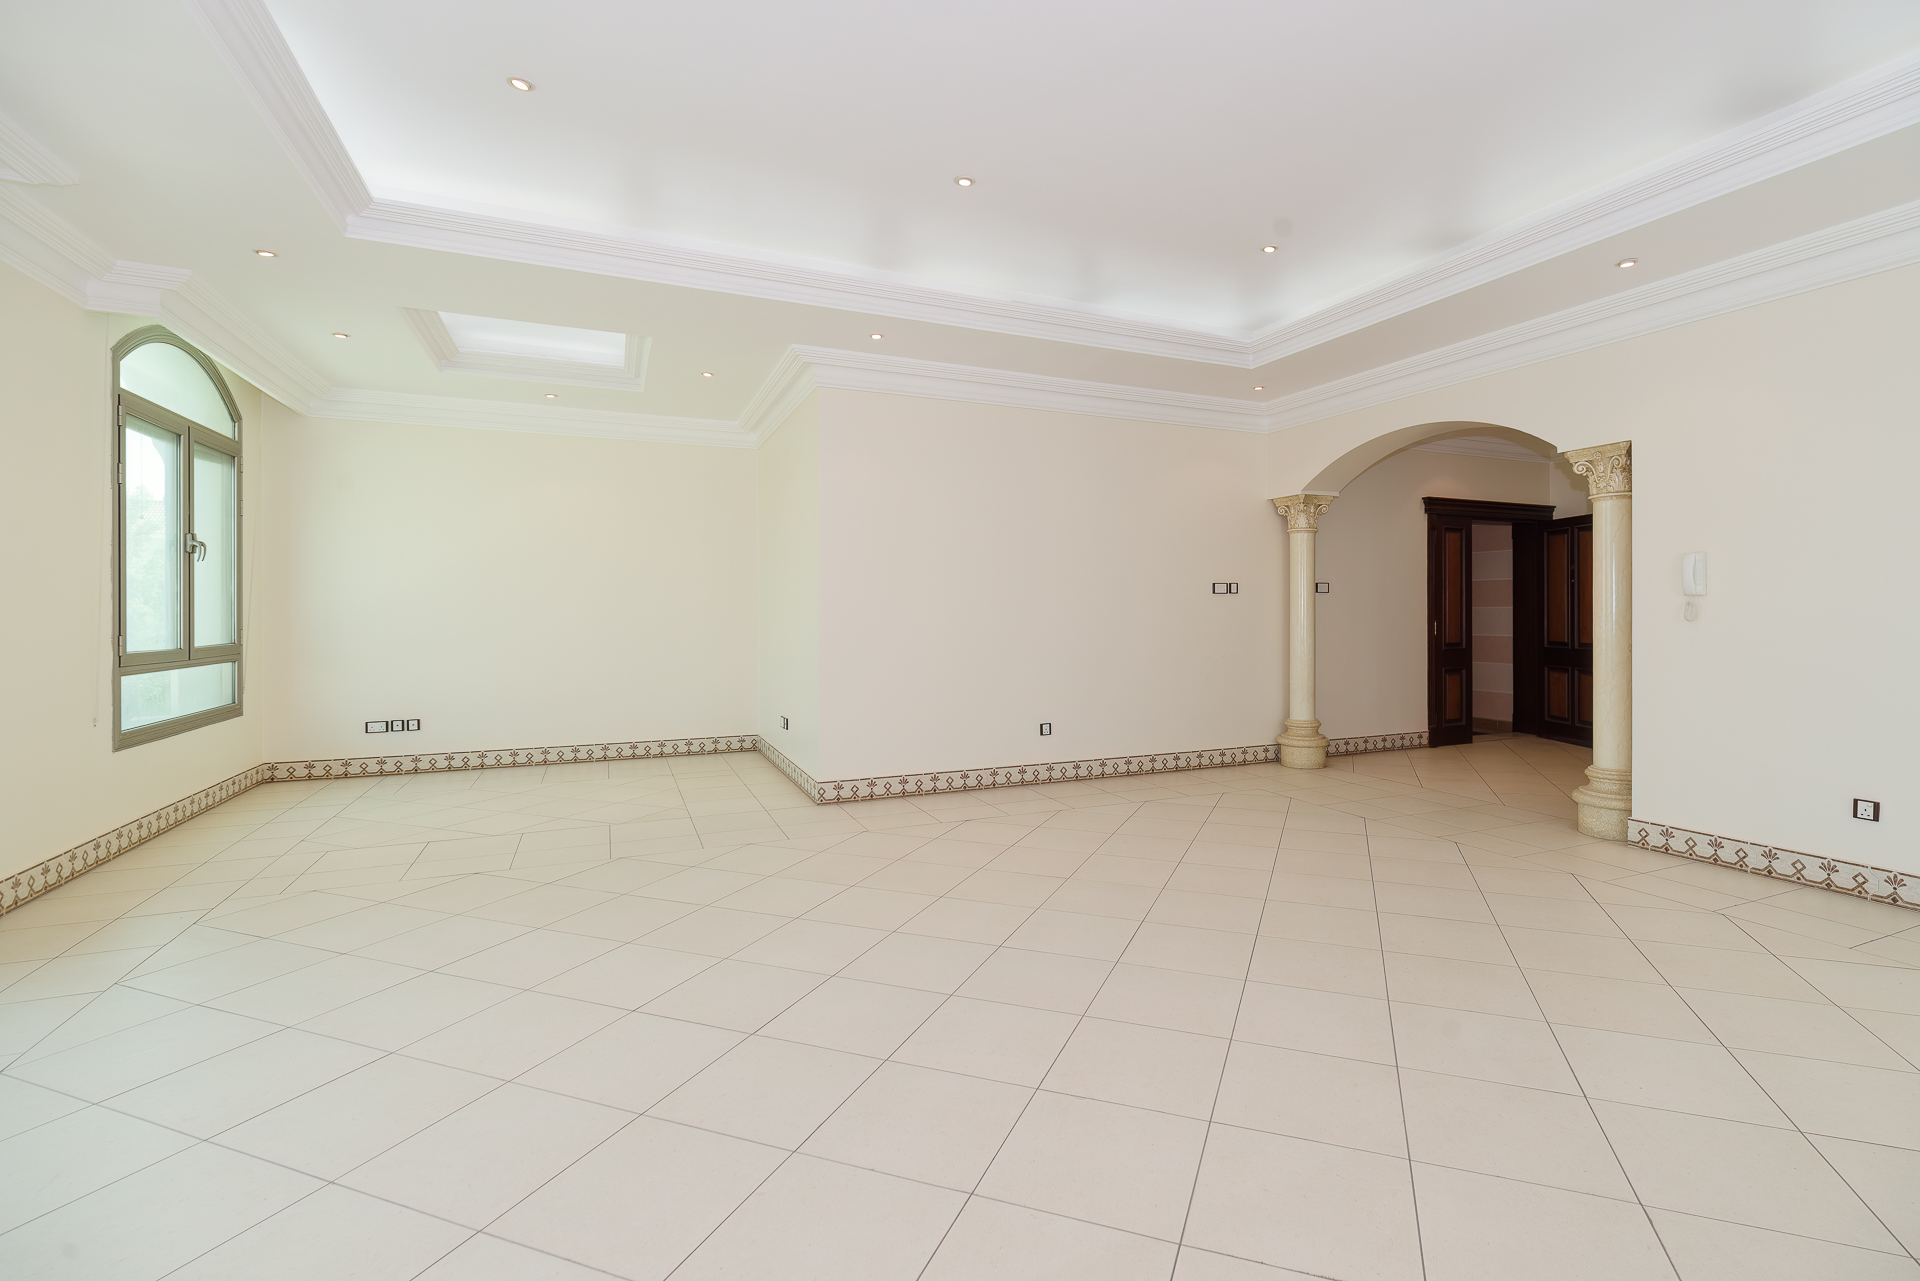 Salwa – spacious, unfurnished, four bedroom apartment